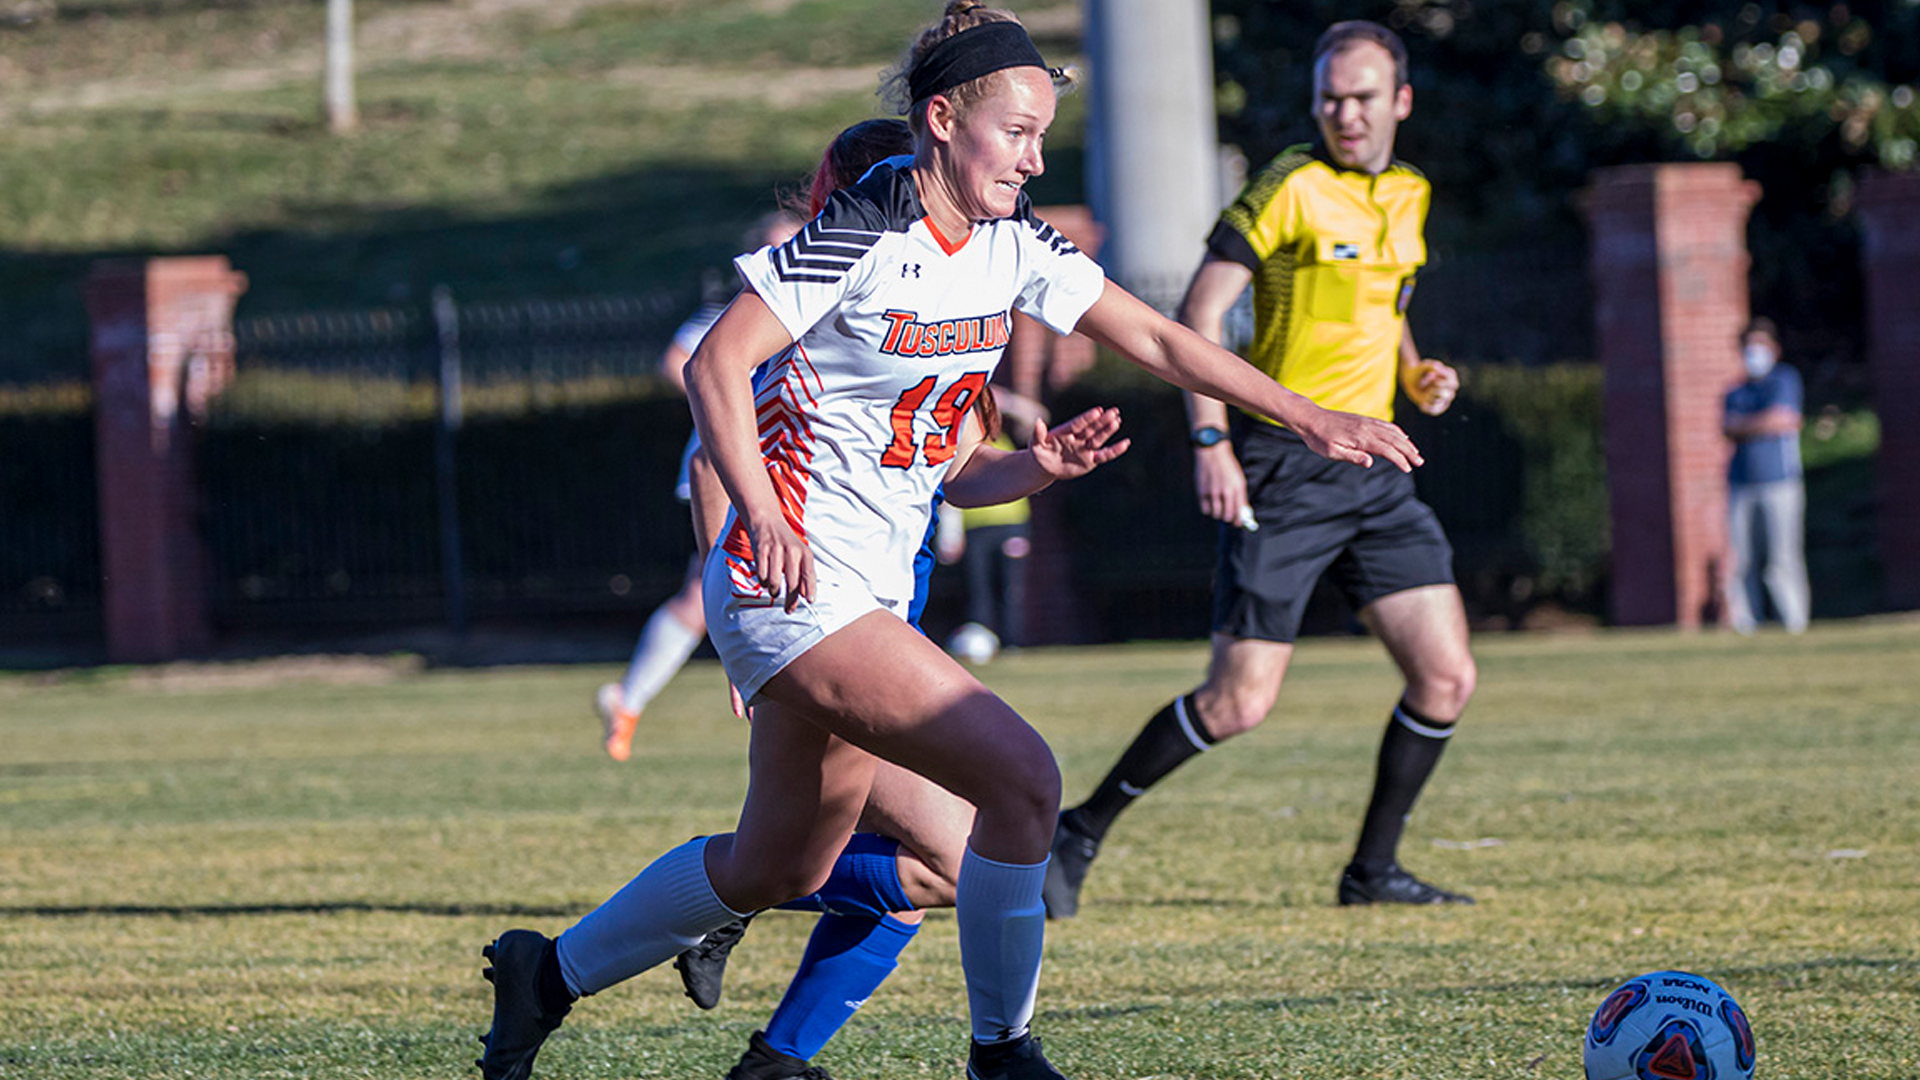 Pioneers open SAC slate with 4-0 win over Mars Hill